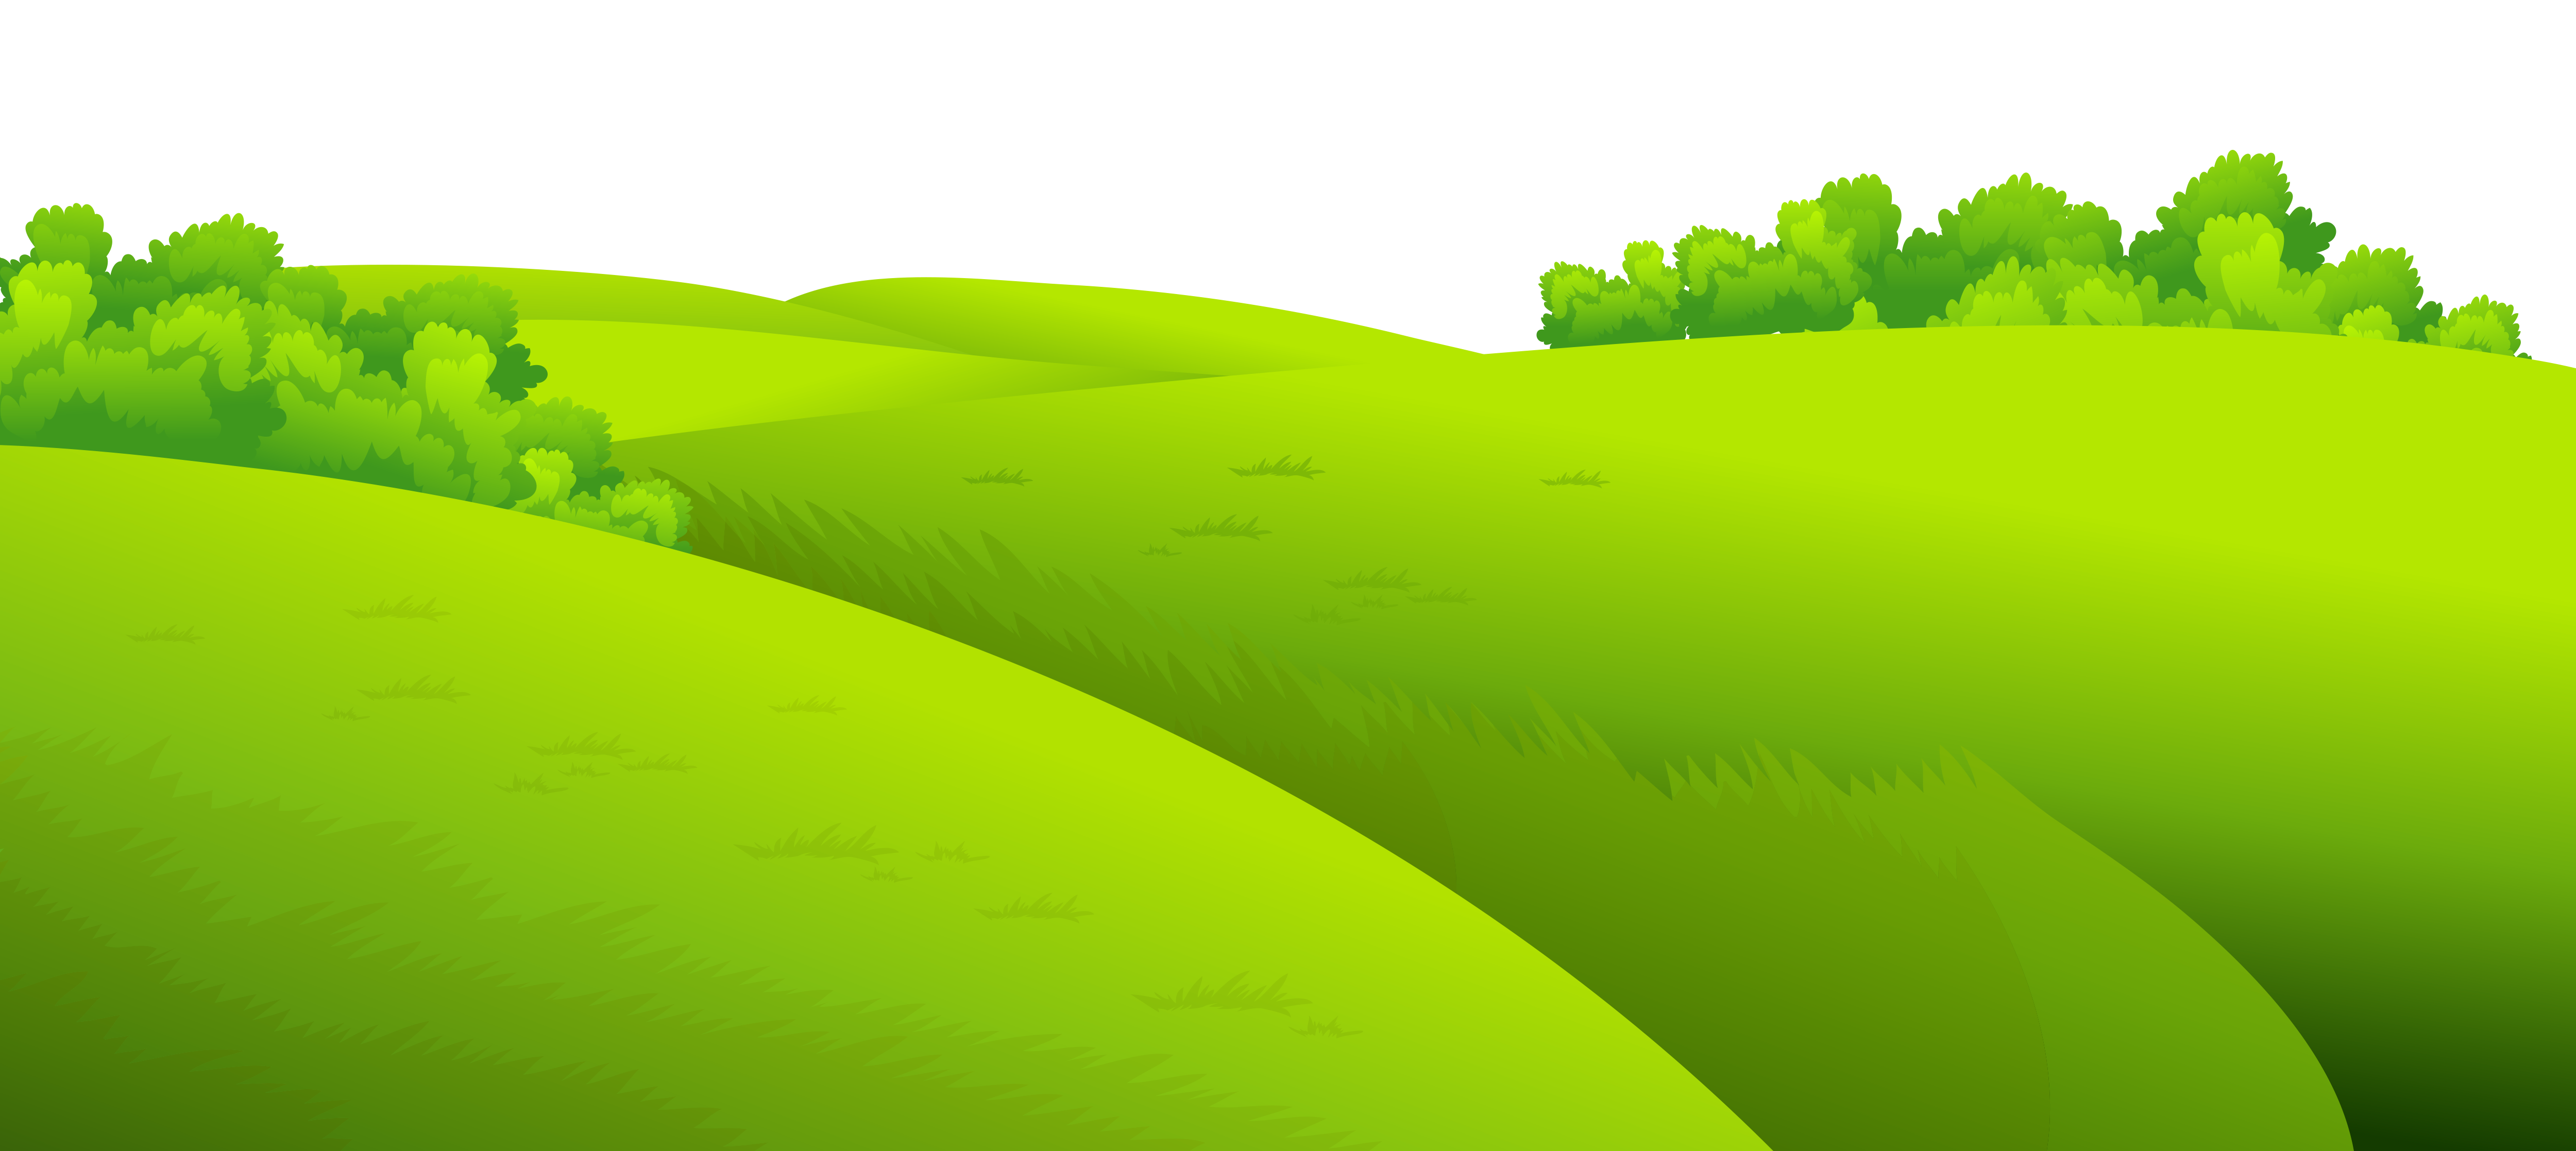 Green grass ground png. Clipart road backdrop